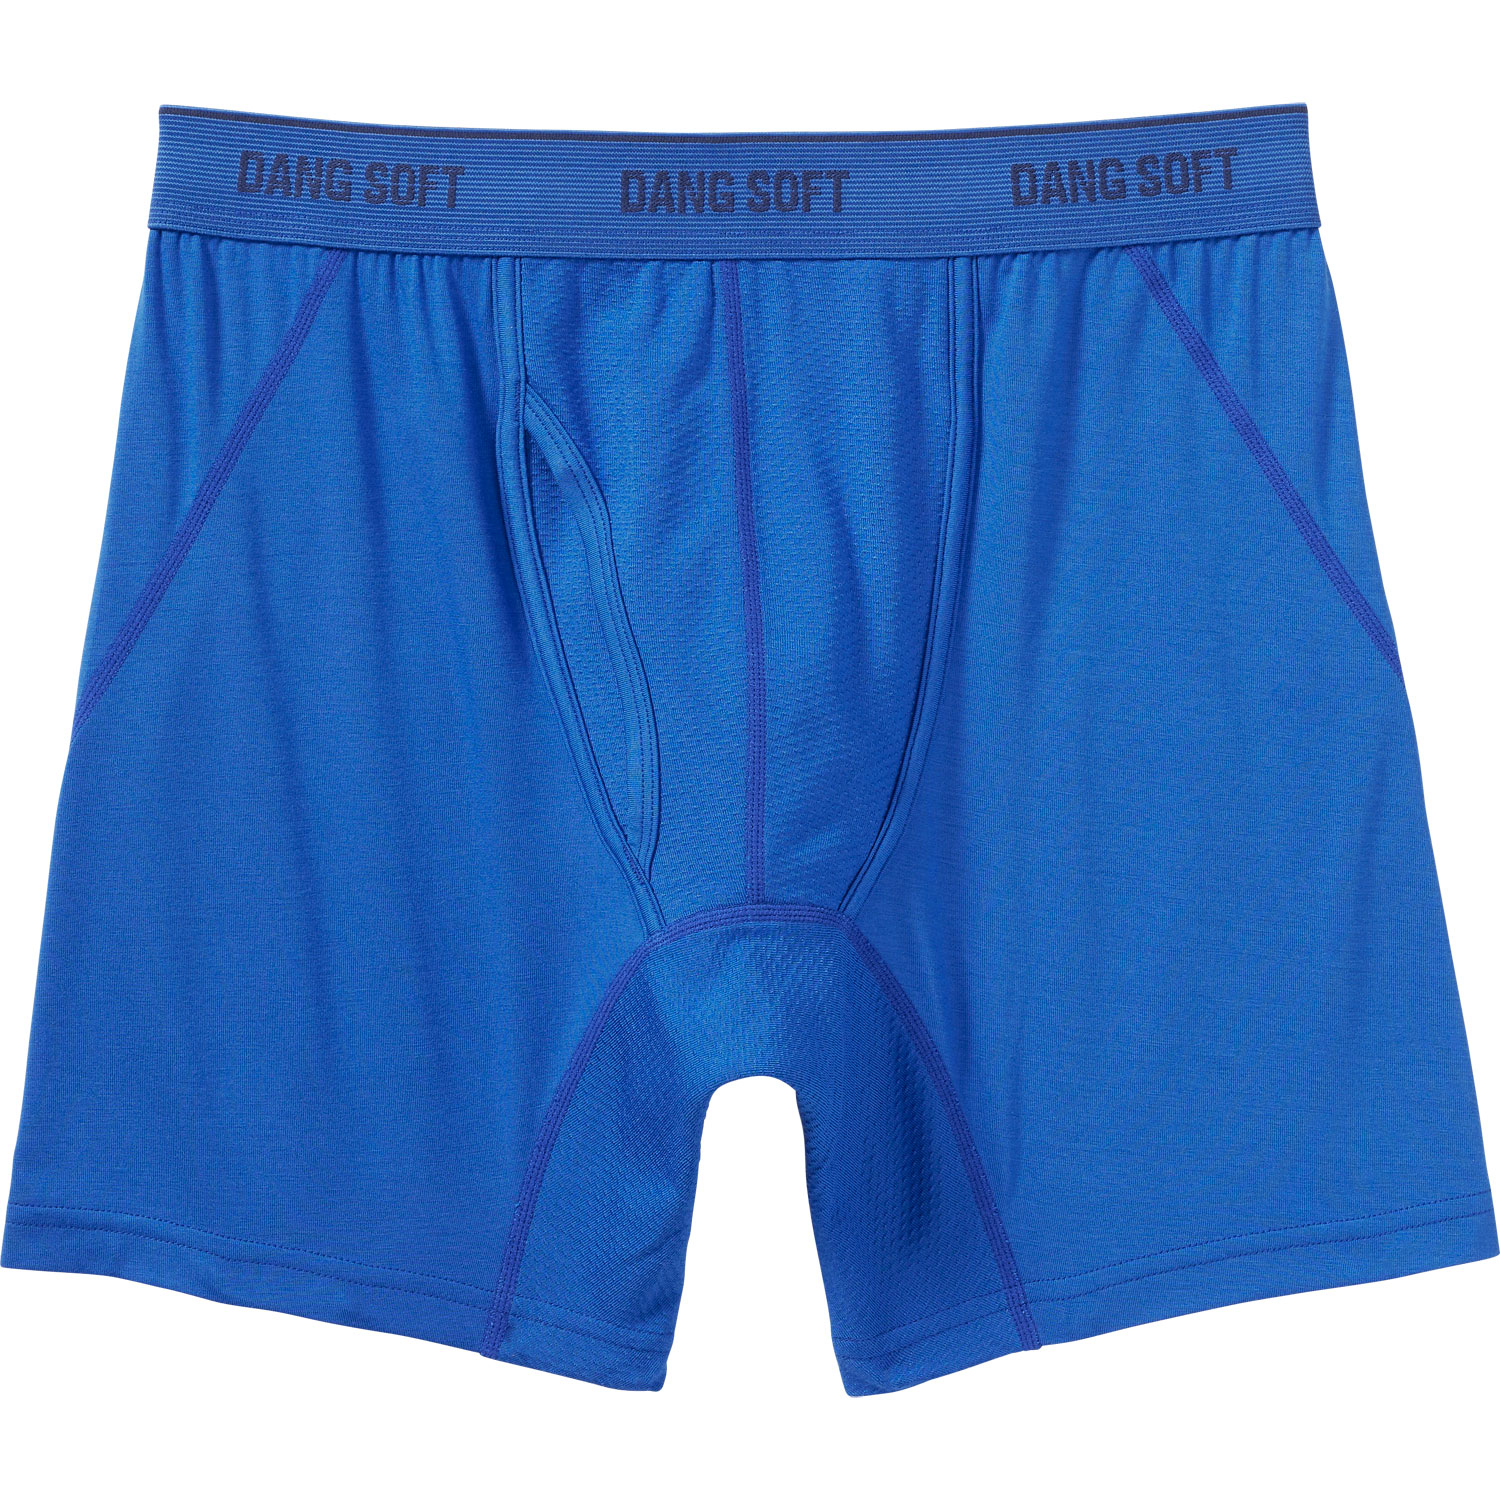 Wood Boxer Brief with Fly